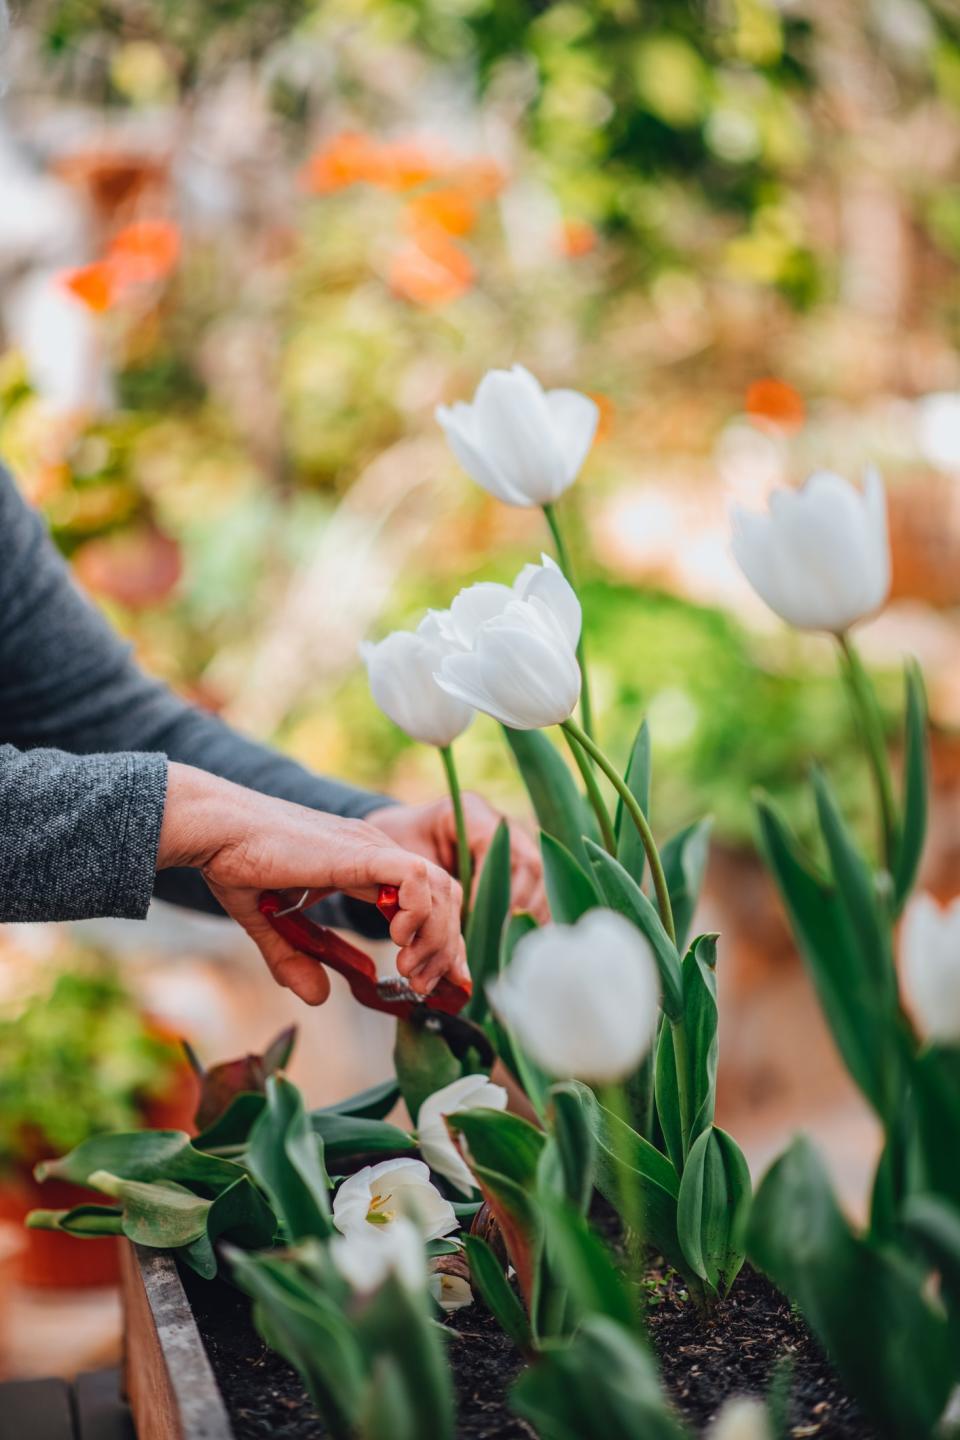 Many gardeners opt to replant tulip bulbs each year.